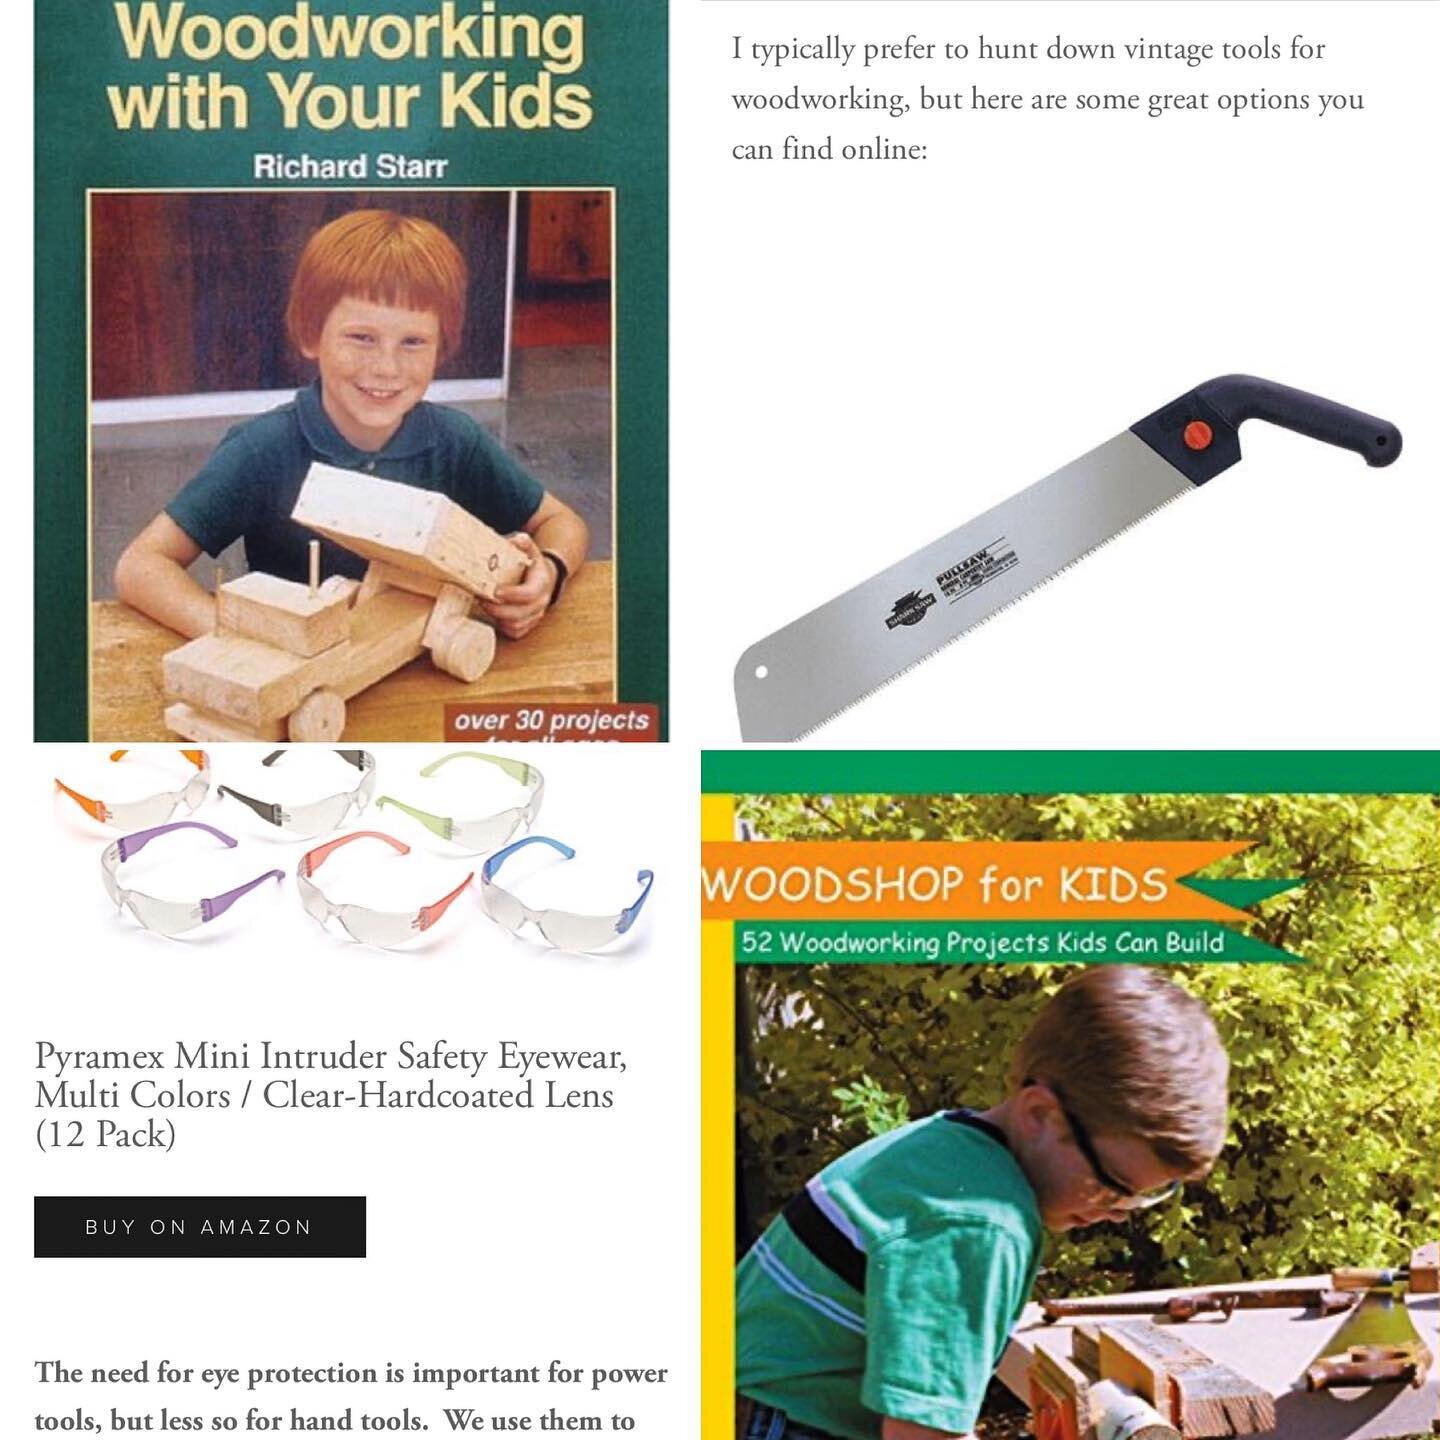 Looking to do some woodworking with your child at home? Kinderwood&rsquo;s resource page (link in the profile) has a great list of tools and books you can order online for your child!

#kidswoodworking #montessori#atxkids #learningathome #stayhome #h